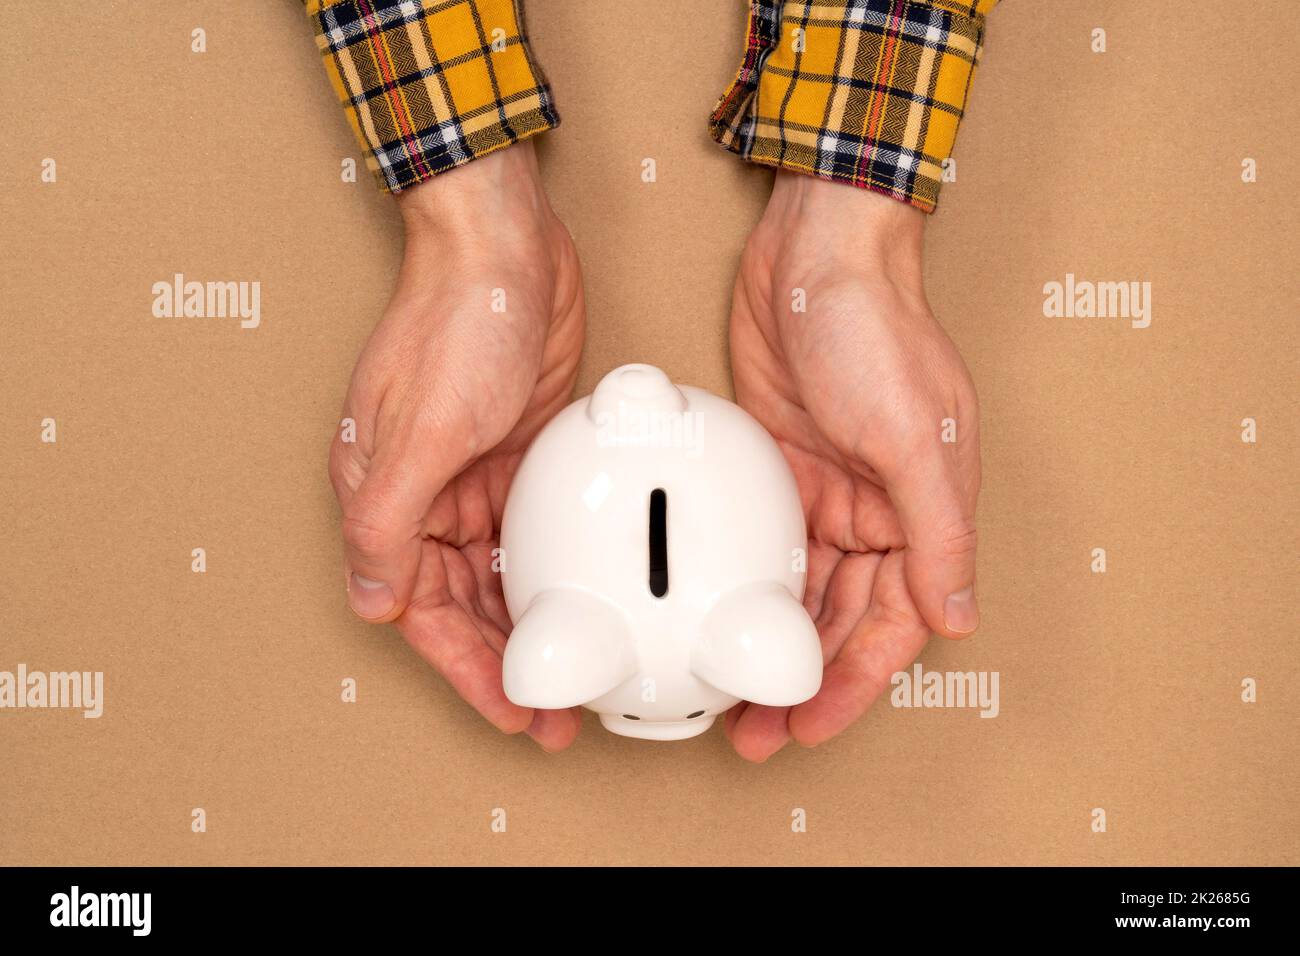 Piggy bank protected by hands Stock Photo